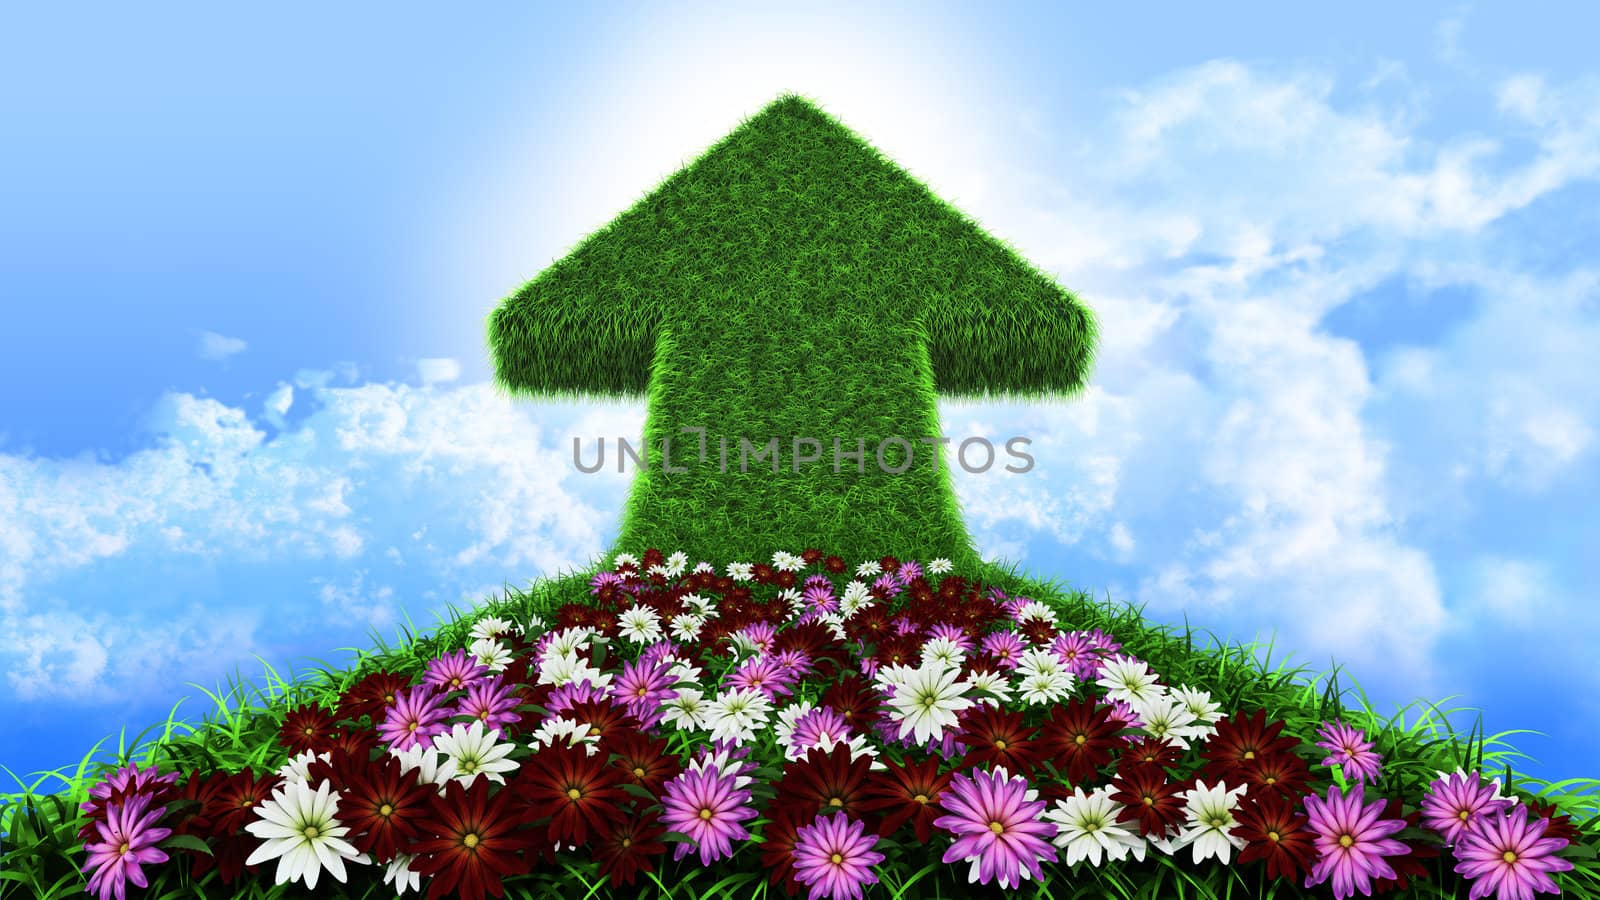 arrow from grass way, with flowers and sky, ecologic symbol by denisgo